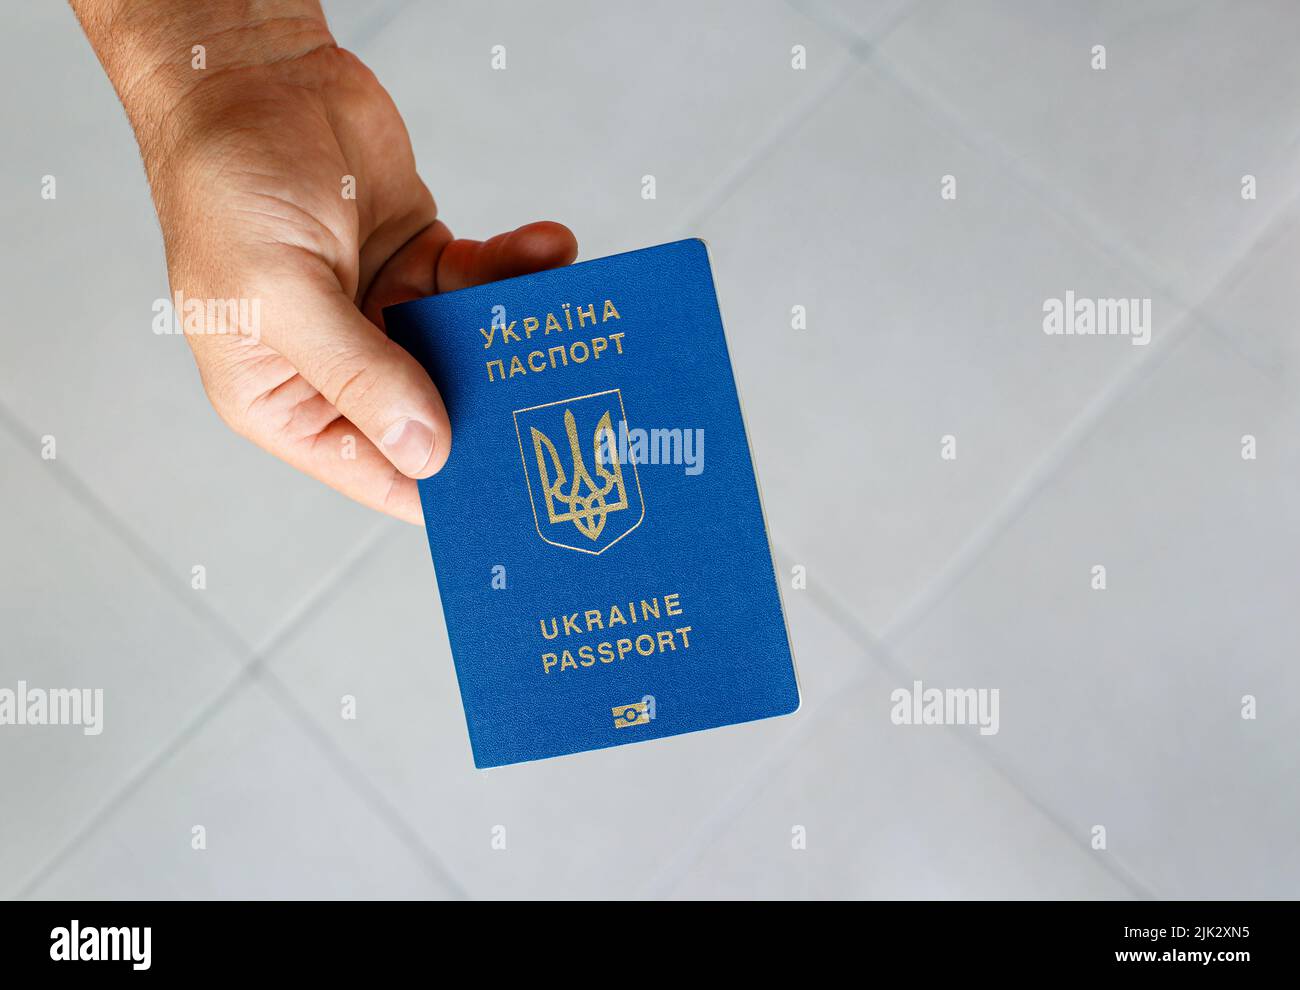 Passport of a citizen of Ukraine in a male hand on a gray background, close-up. Stock Photo